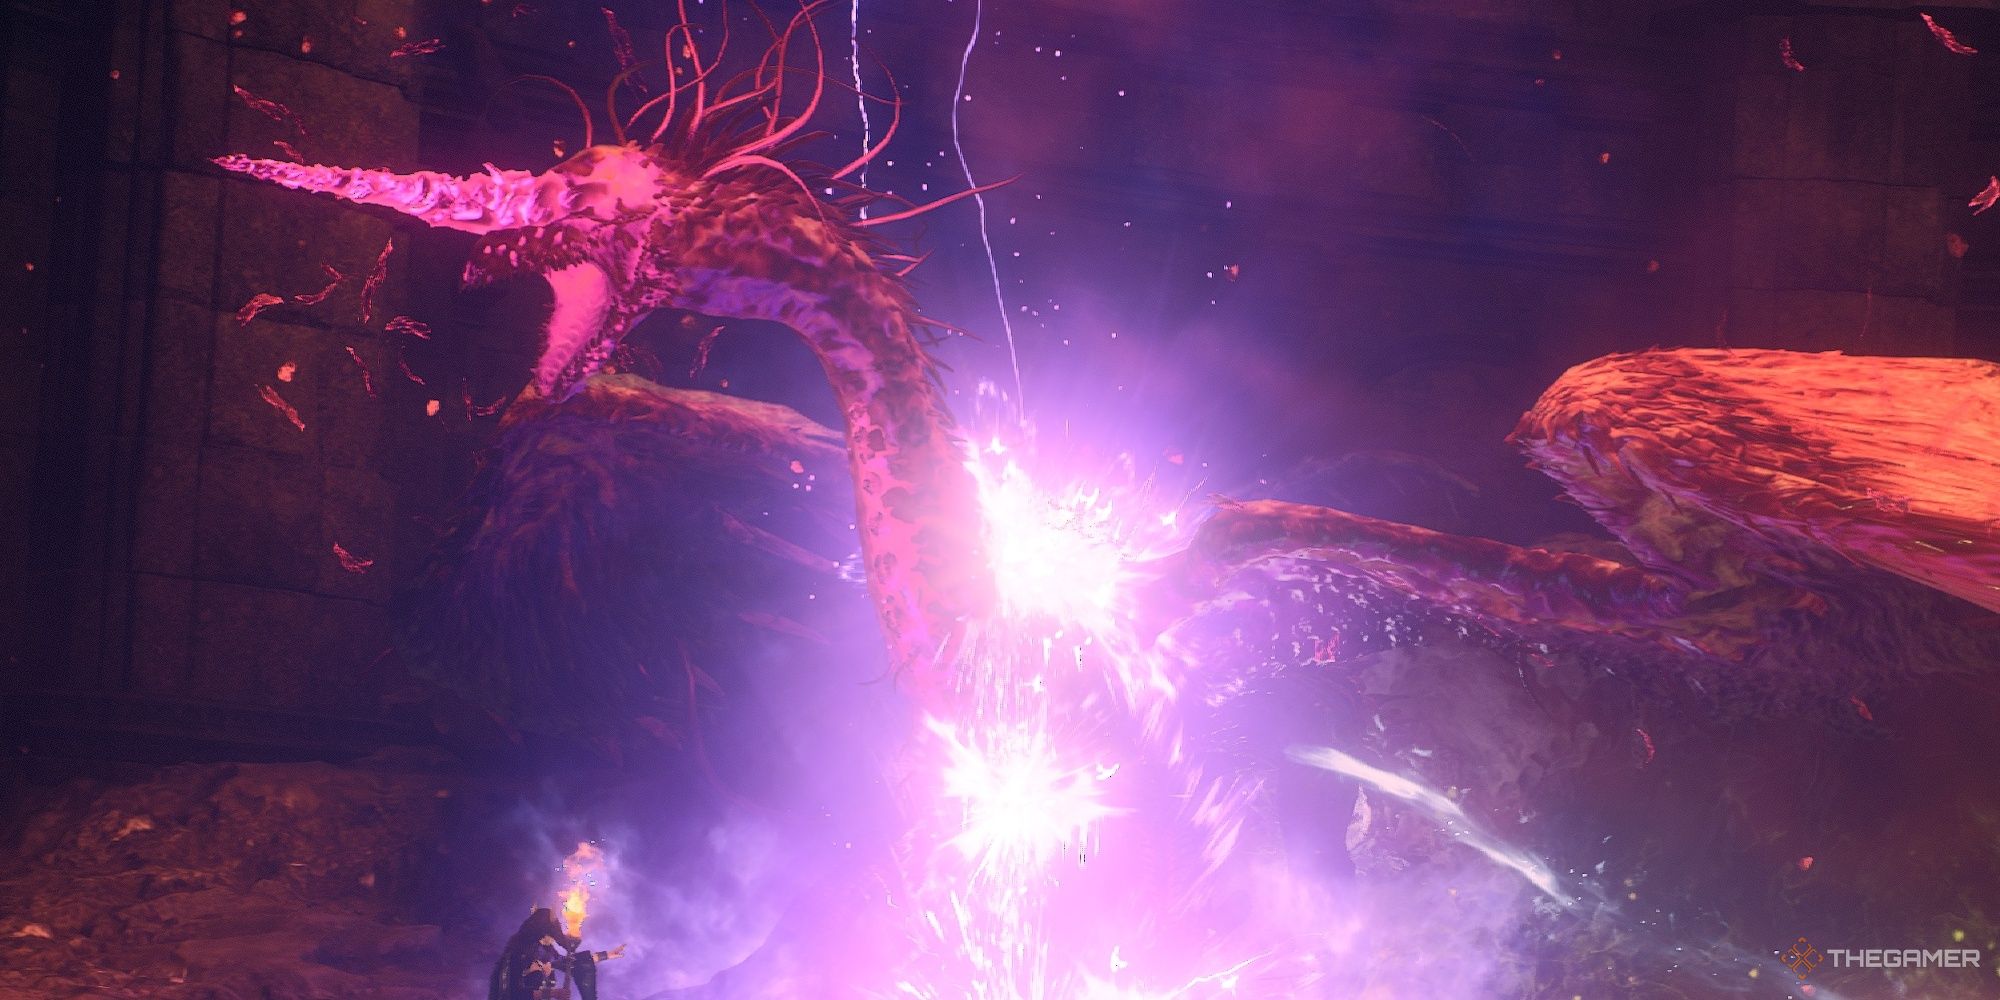 The Purgener Dragon In Vernworth being attacked in Dragon's Dogma 2.